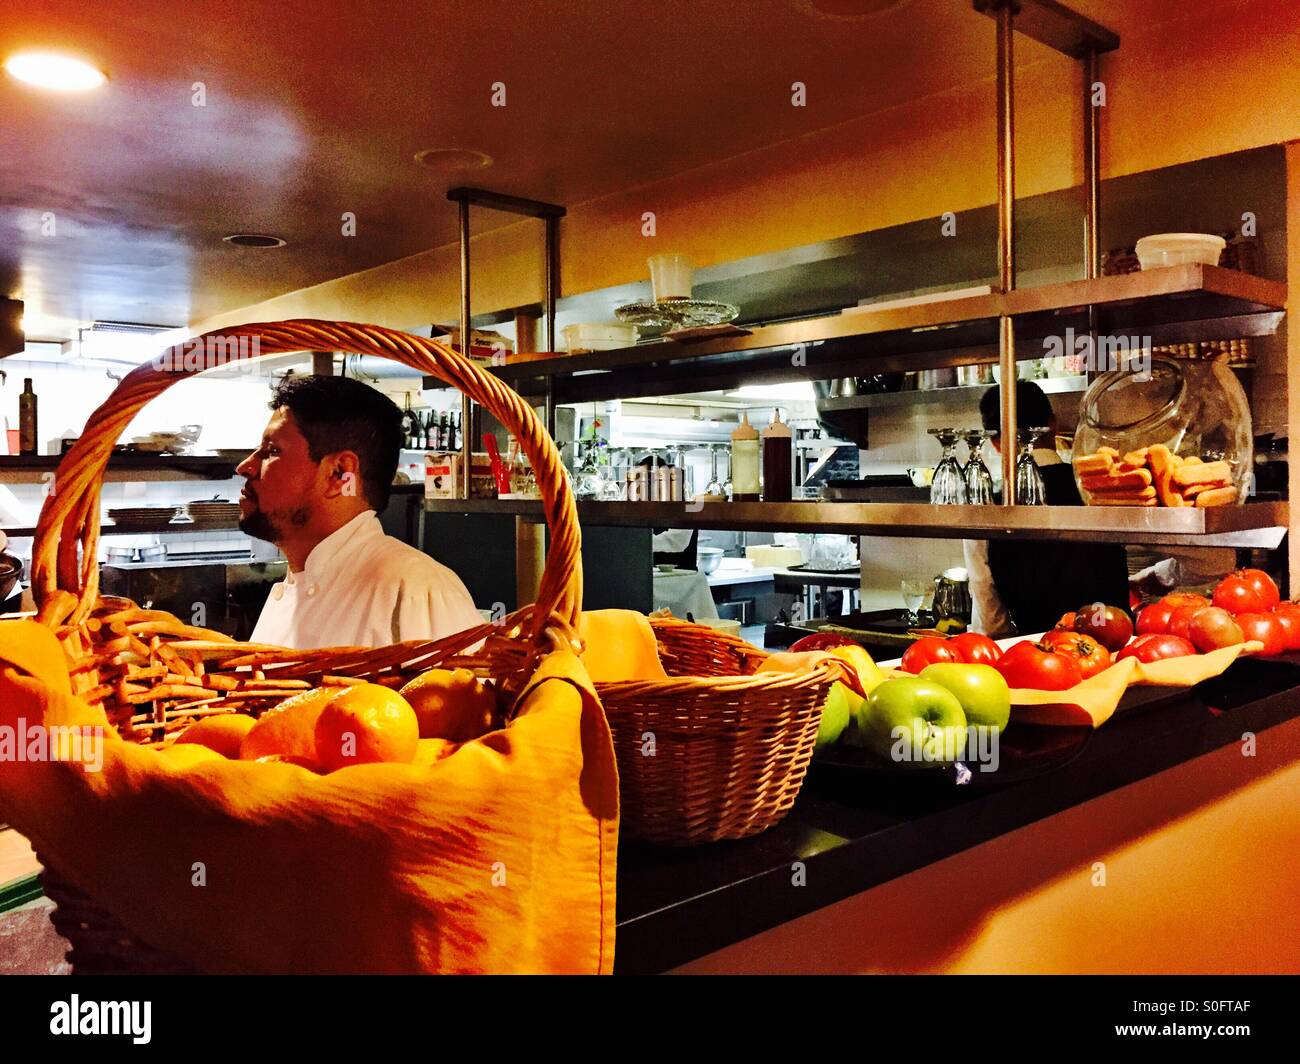 Chef focused in kitchen behind an Italian American restaurant in San Francisco, California, USA. Stock Photo